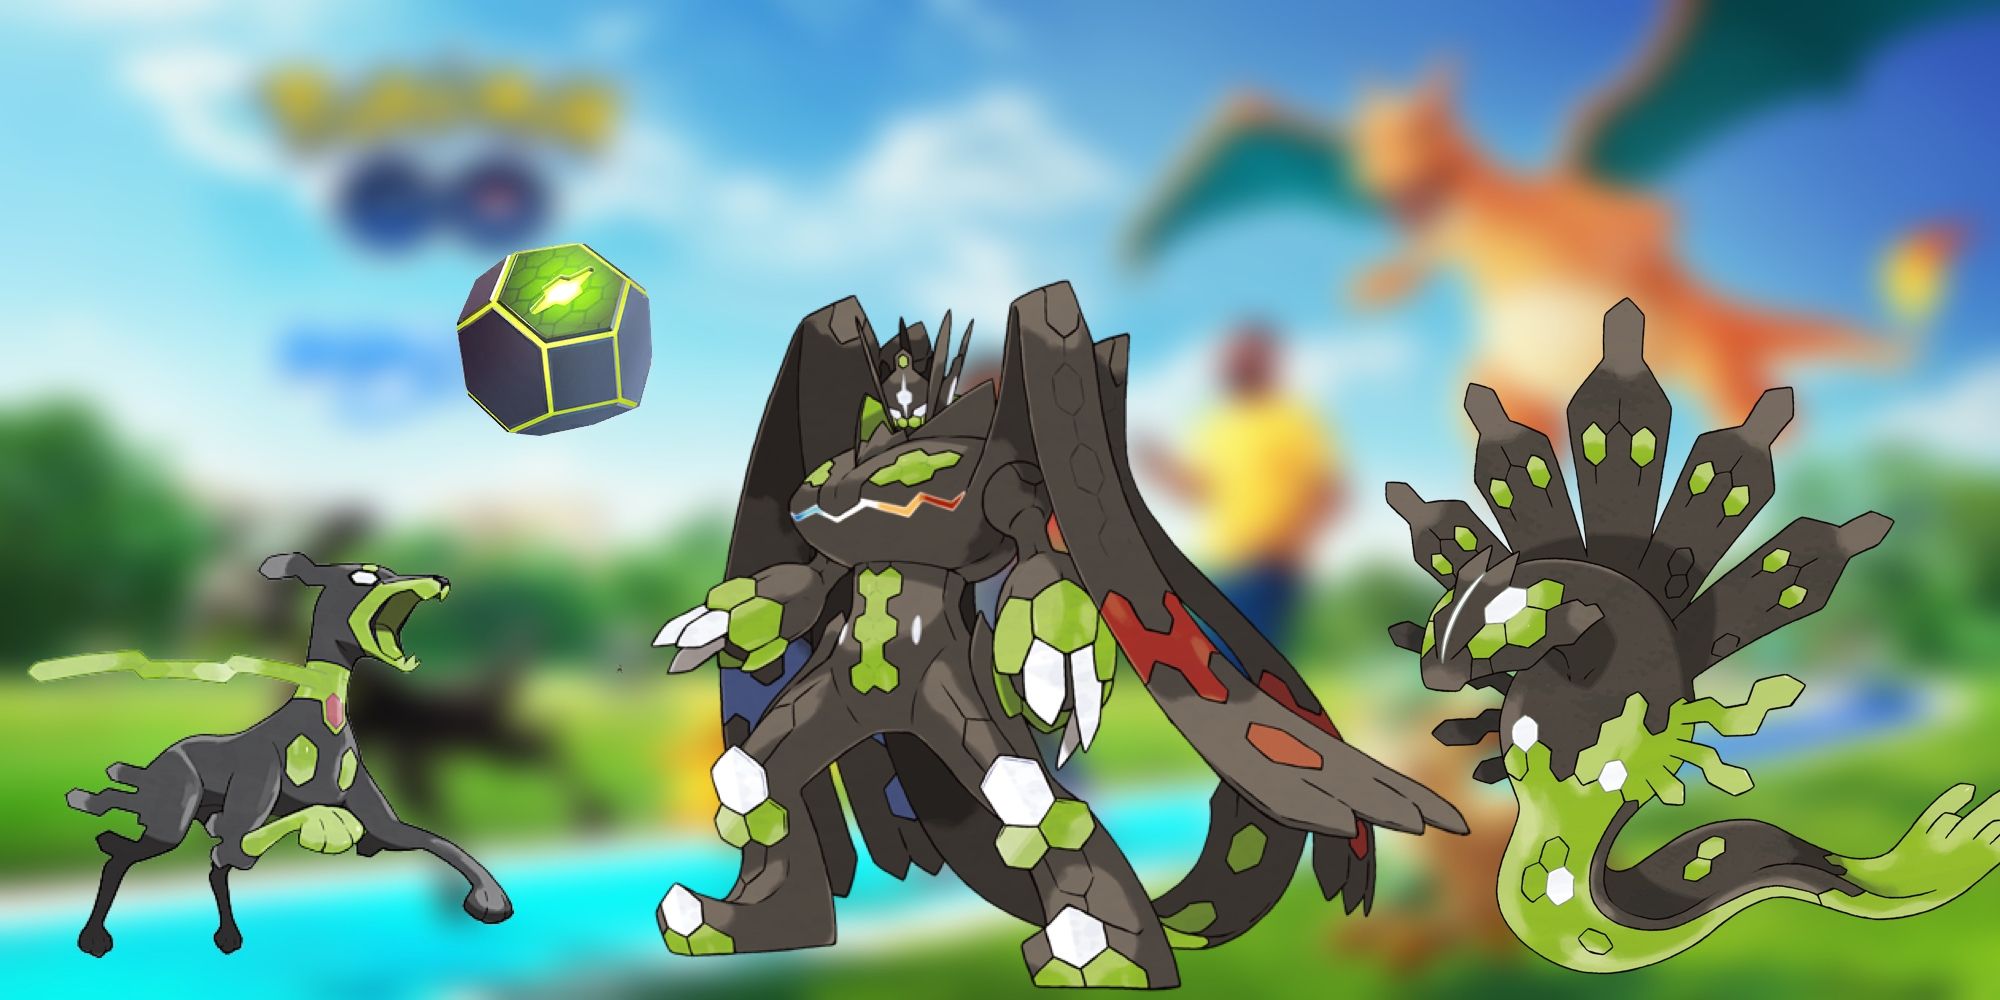 Pokemon GO How to Get and Use Zygarde Cube